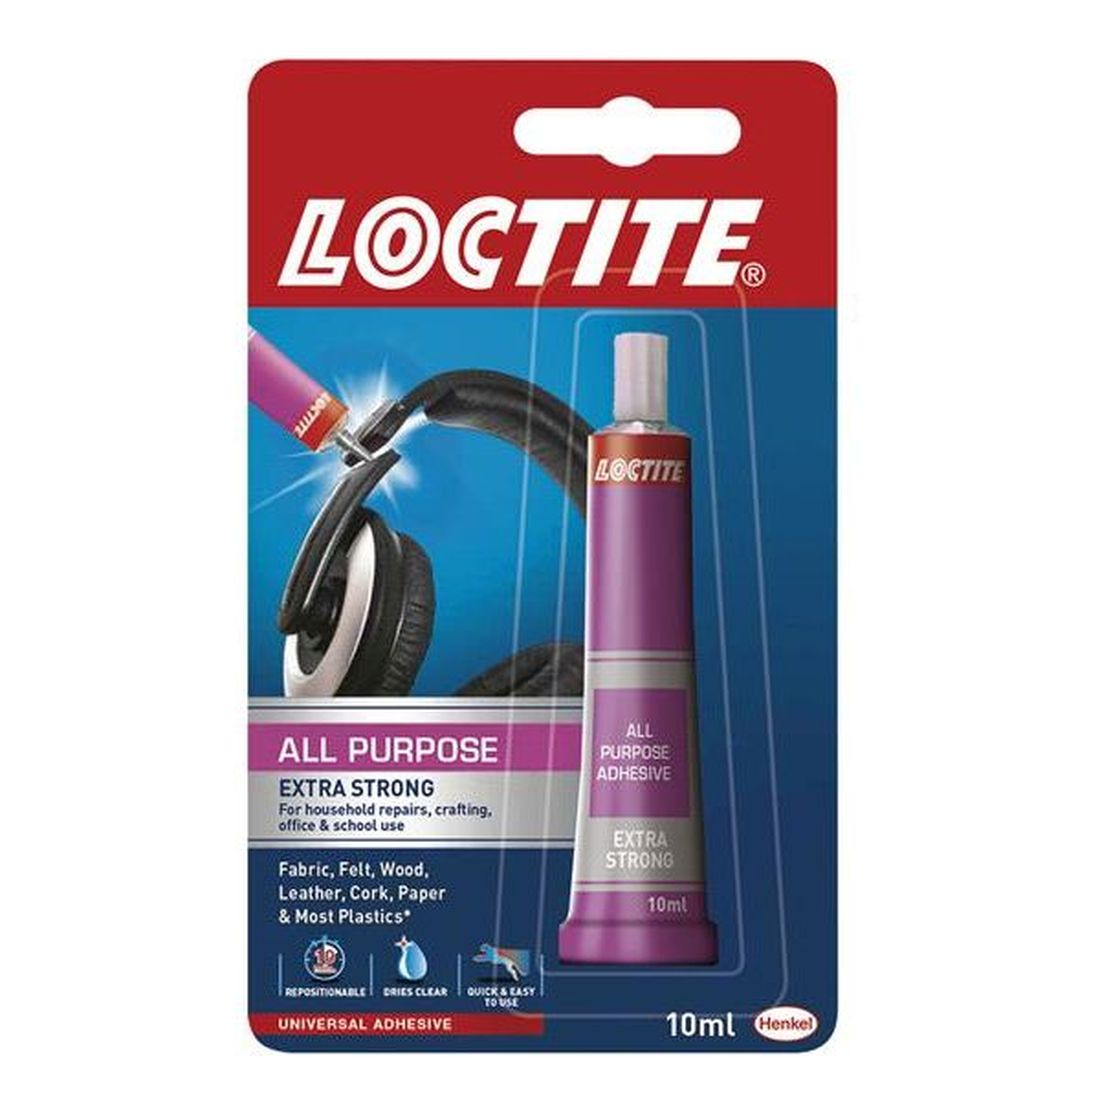 Loctite All Purpose Adhesive Extra Strong 20ml                                          